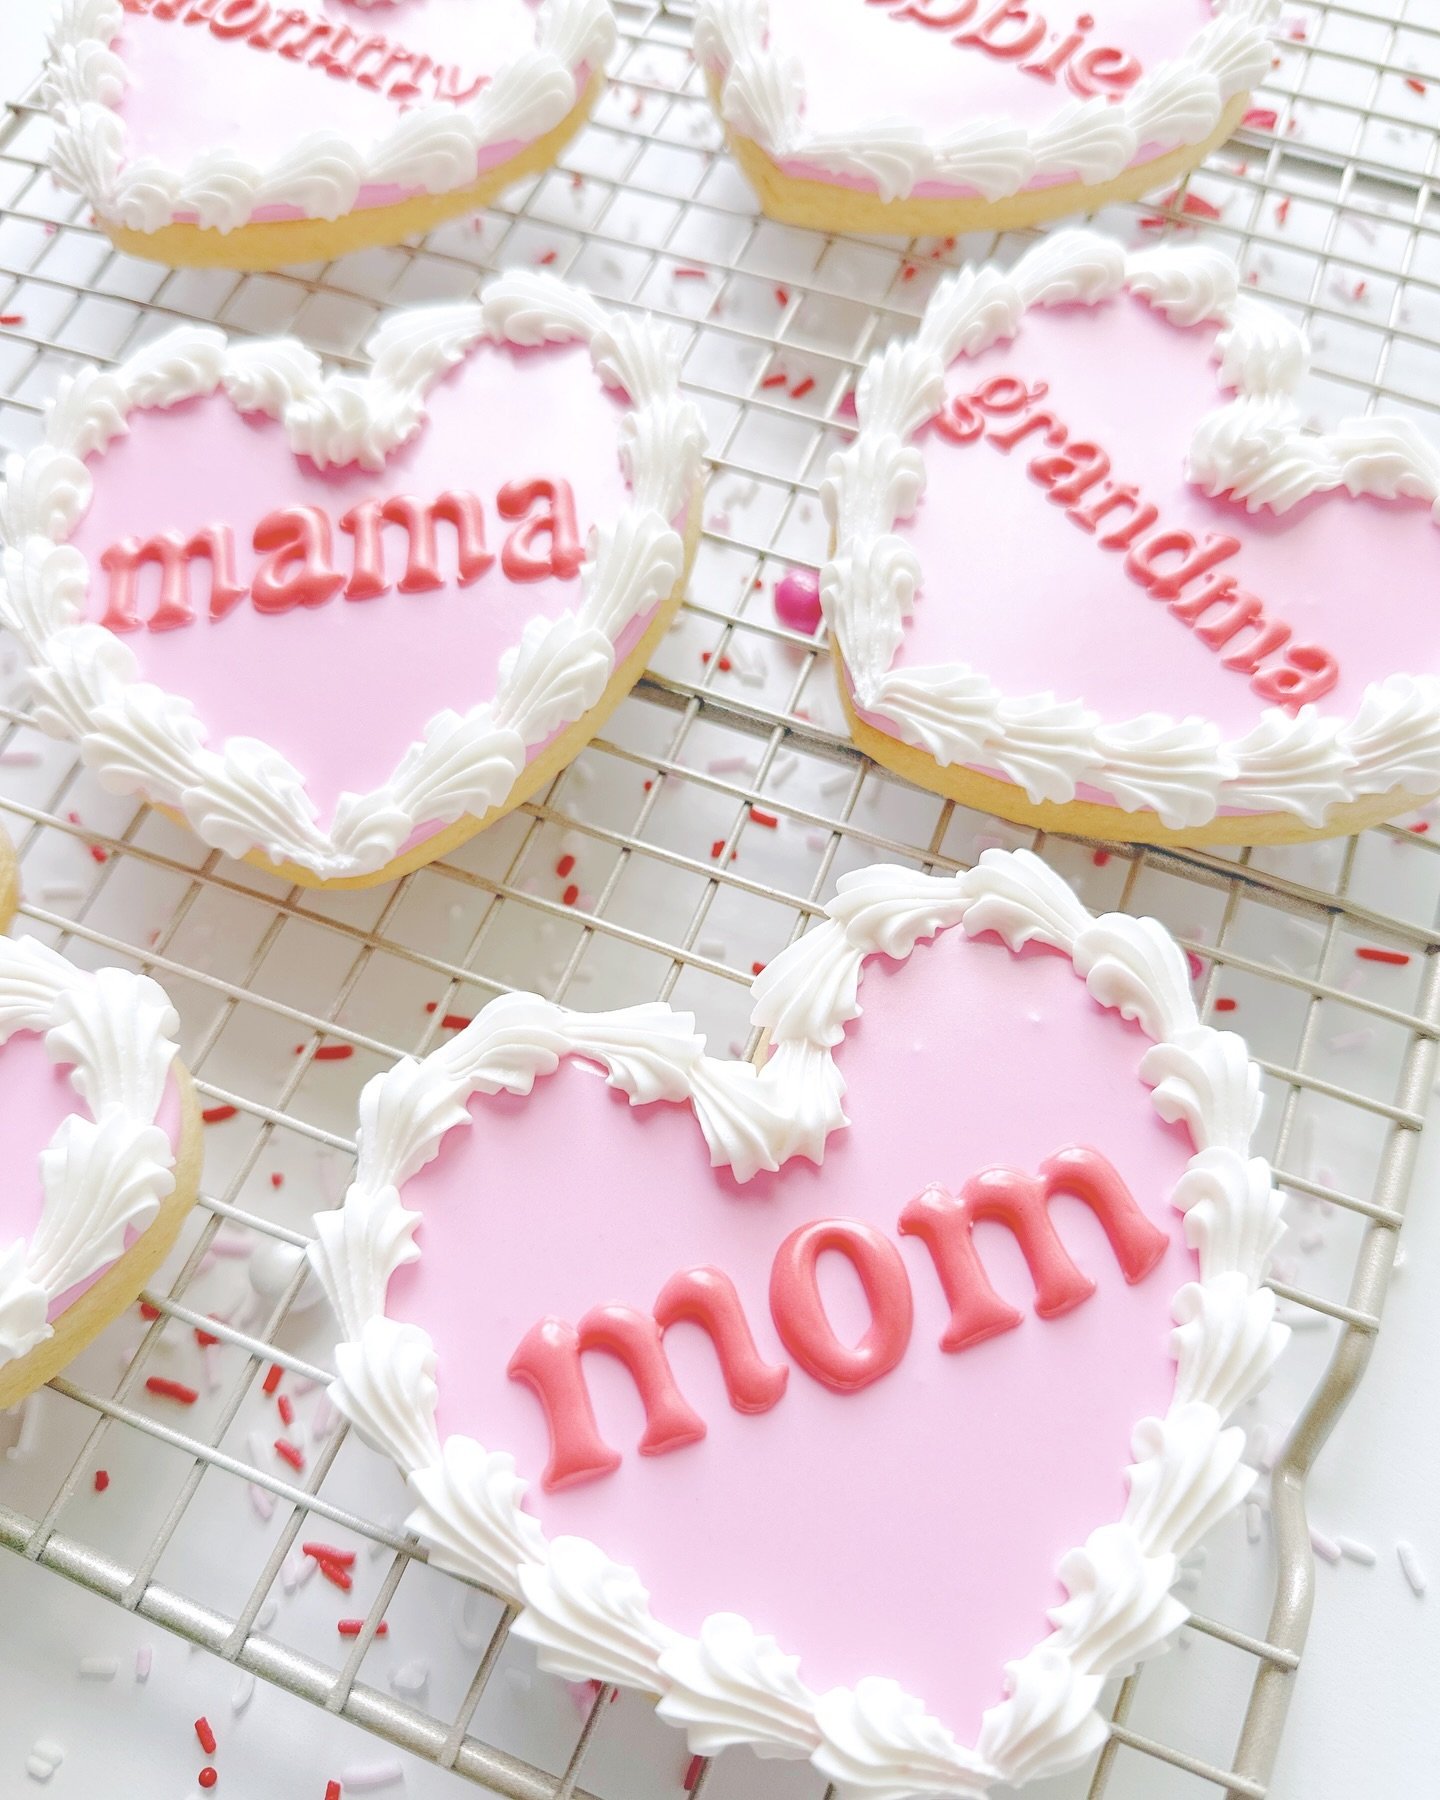 A very happy Mother&rsquo;s Day to all my favorite moms out there. Hope your day is filled with relaxation, joy and maybe a few cocktails! 

#happymothersday #mothersday #mothersdaycookies #cookiesofinstagram #detroitinfluencer